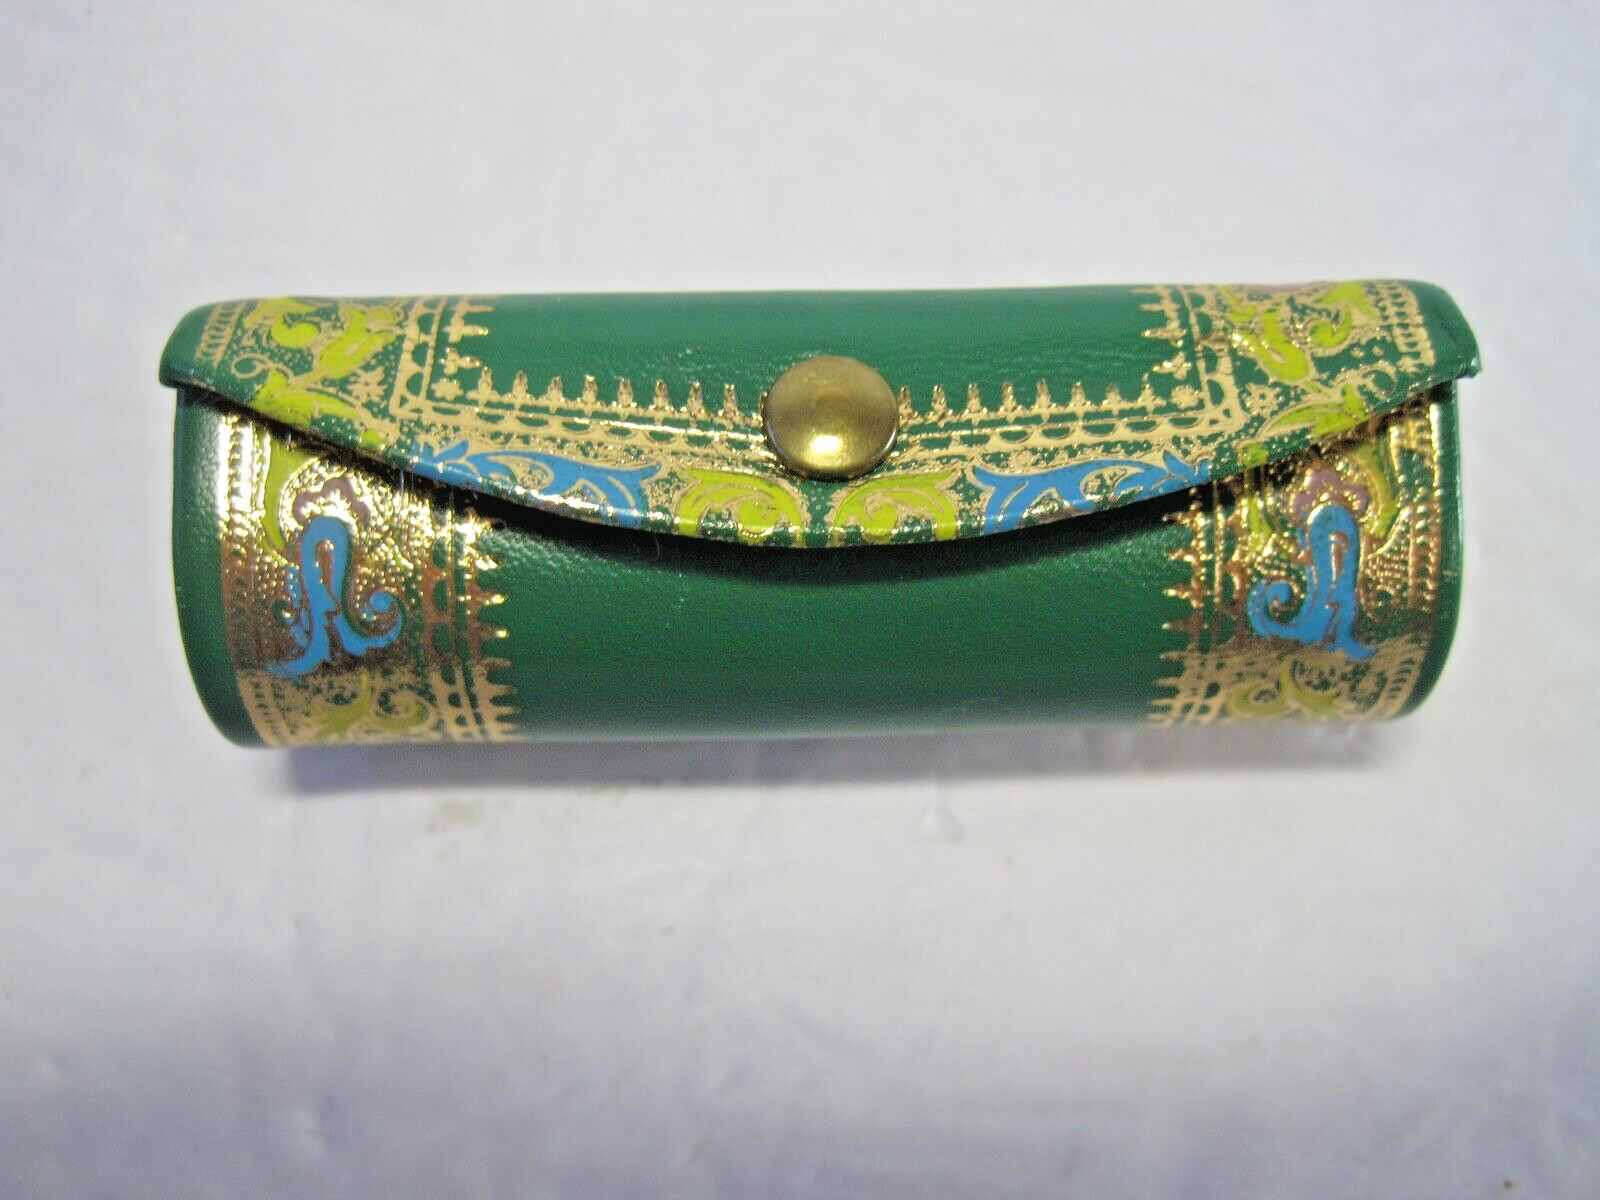 Vintage Fiocchi Italy Leather Lipstick Case Holder Mirror Green Gold Blue Great